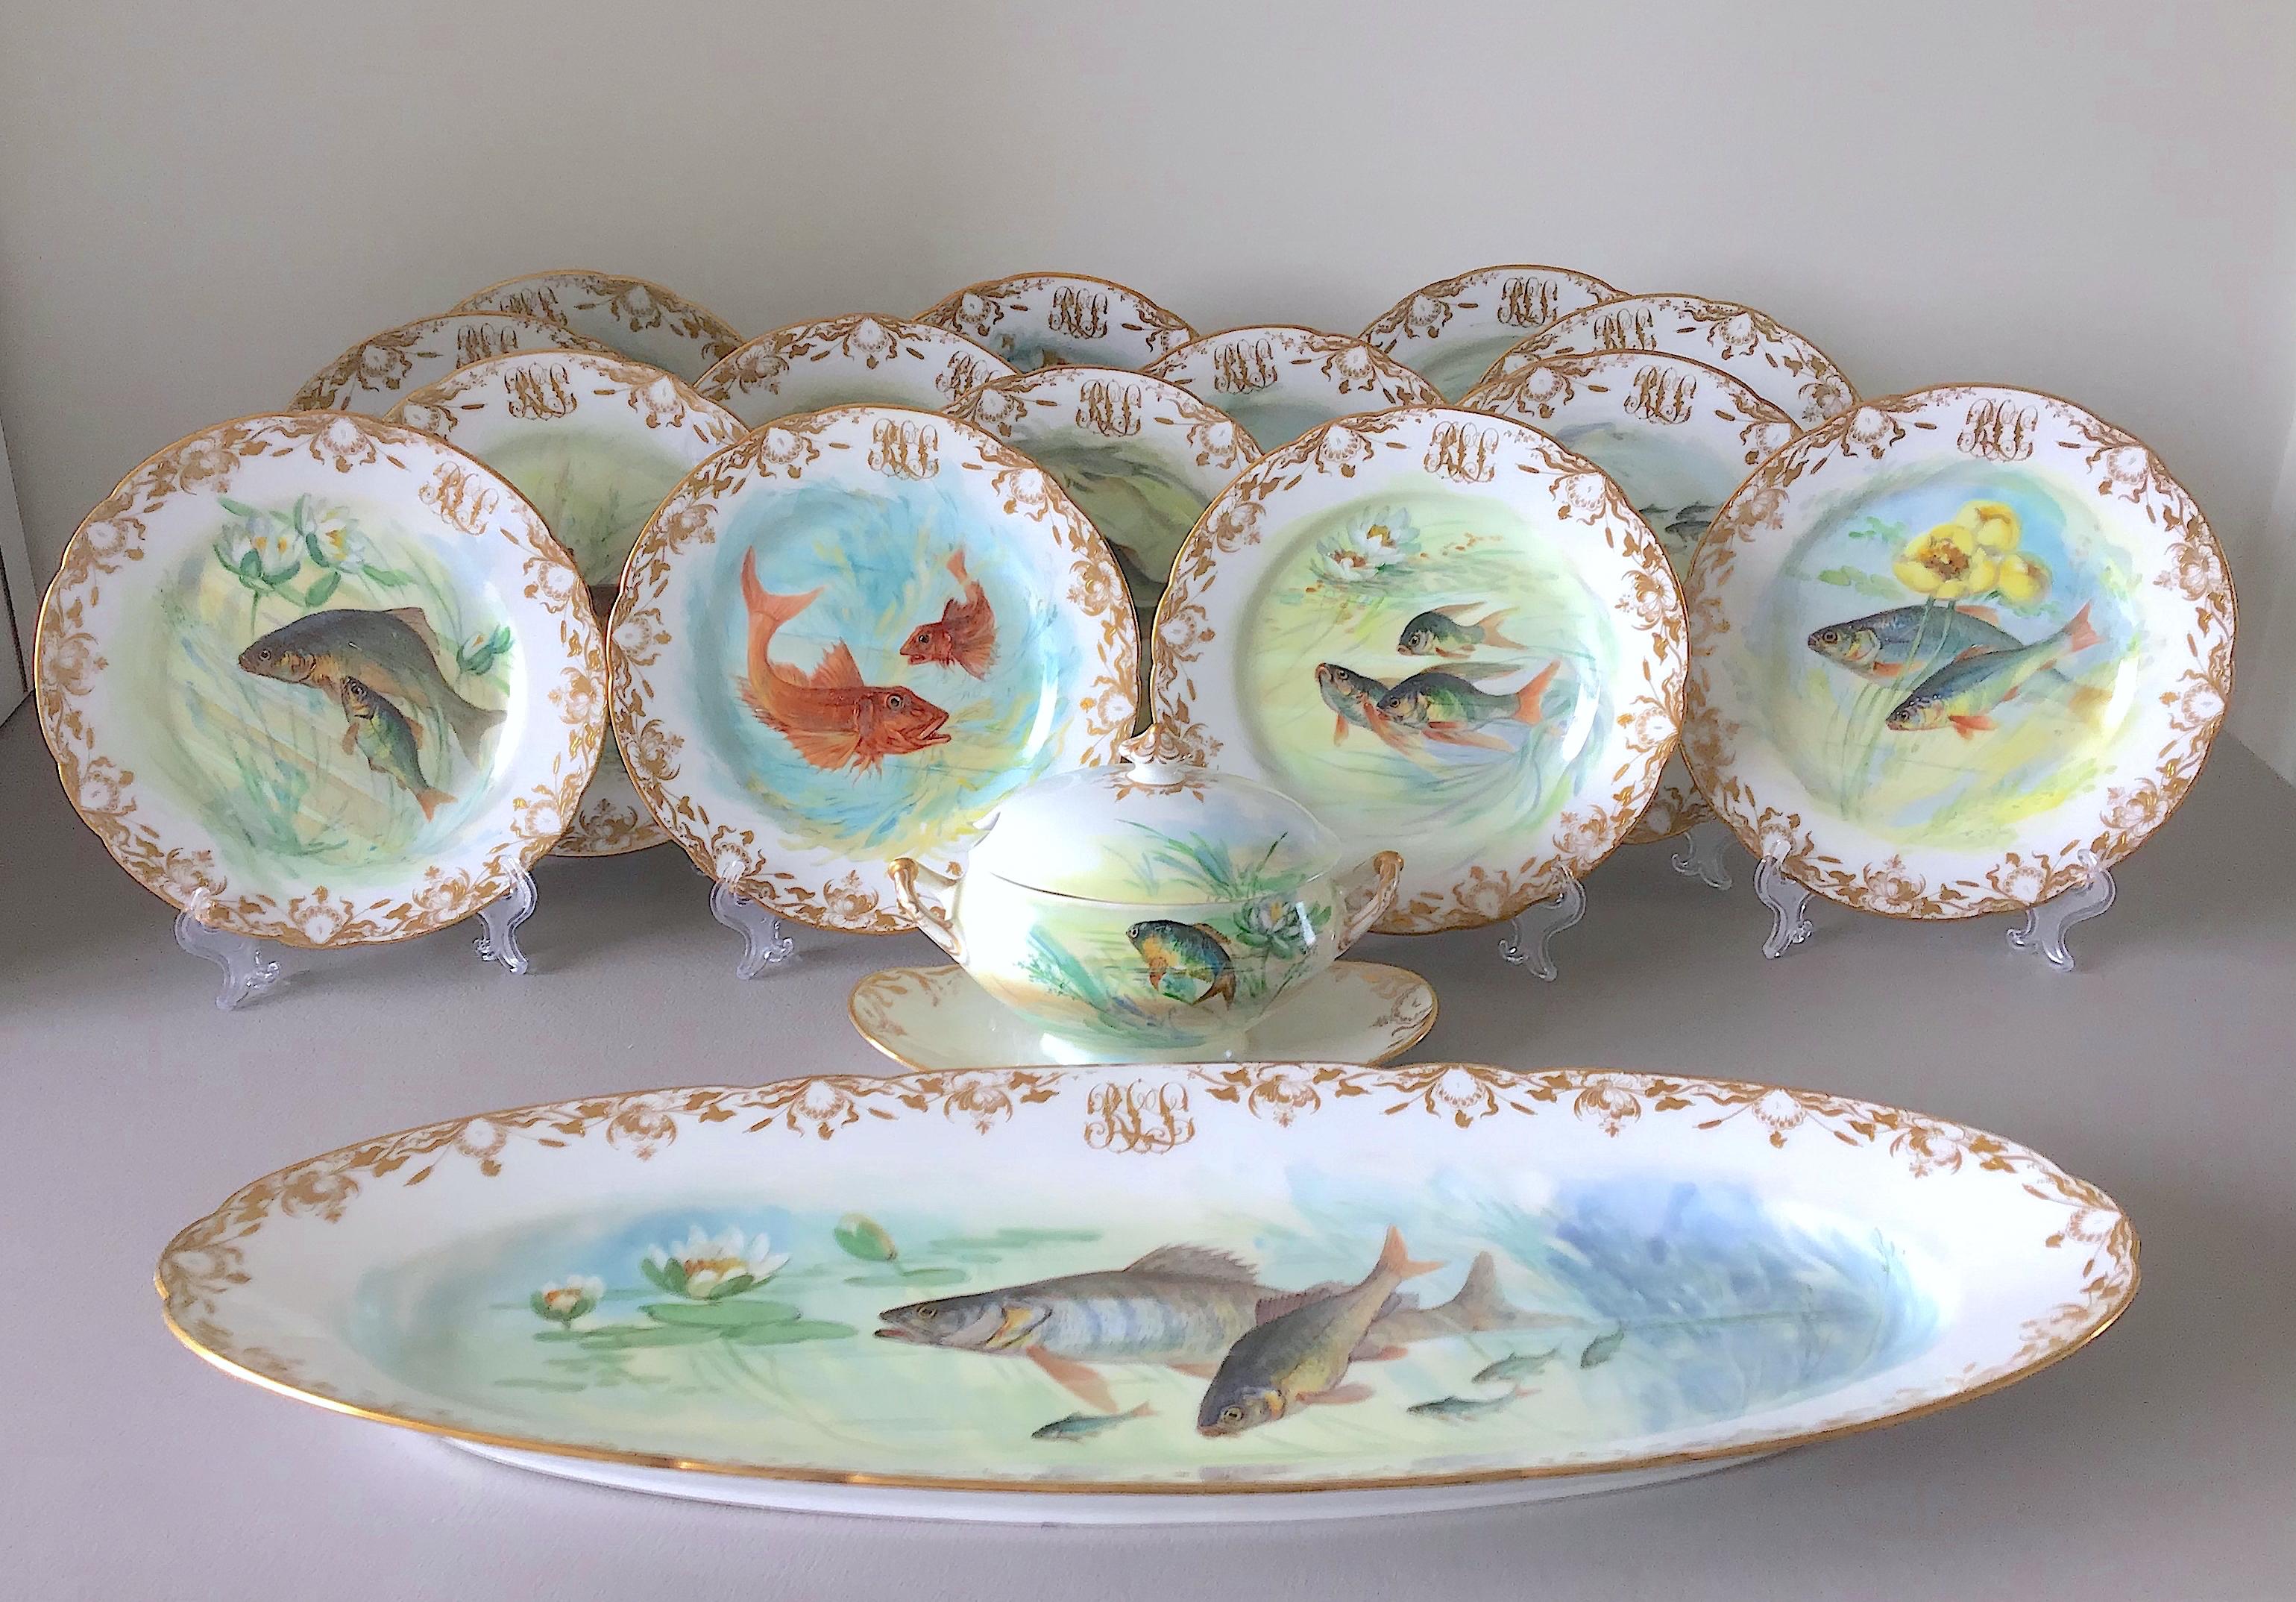 One of the kind hand-painted porcelain dinner fish service for 14 made by famous Ambrosius Lamm studio in Dresden in 1930s. This service was made by a special order, only few fish sets were made during the Lamm studio production.

Amazing raised